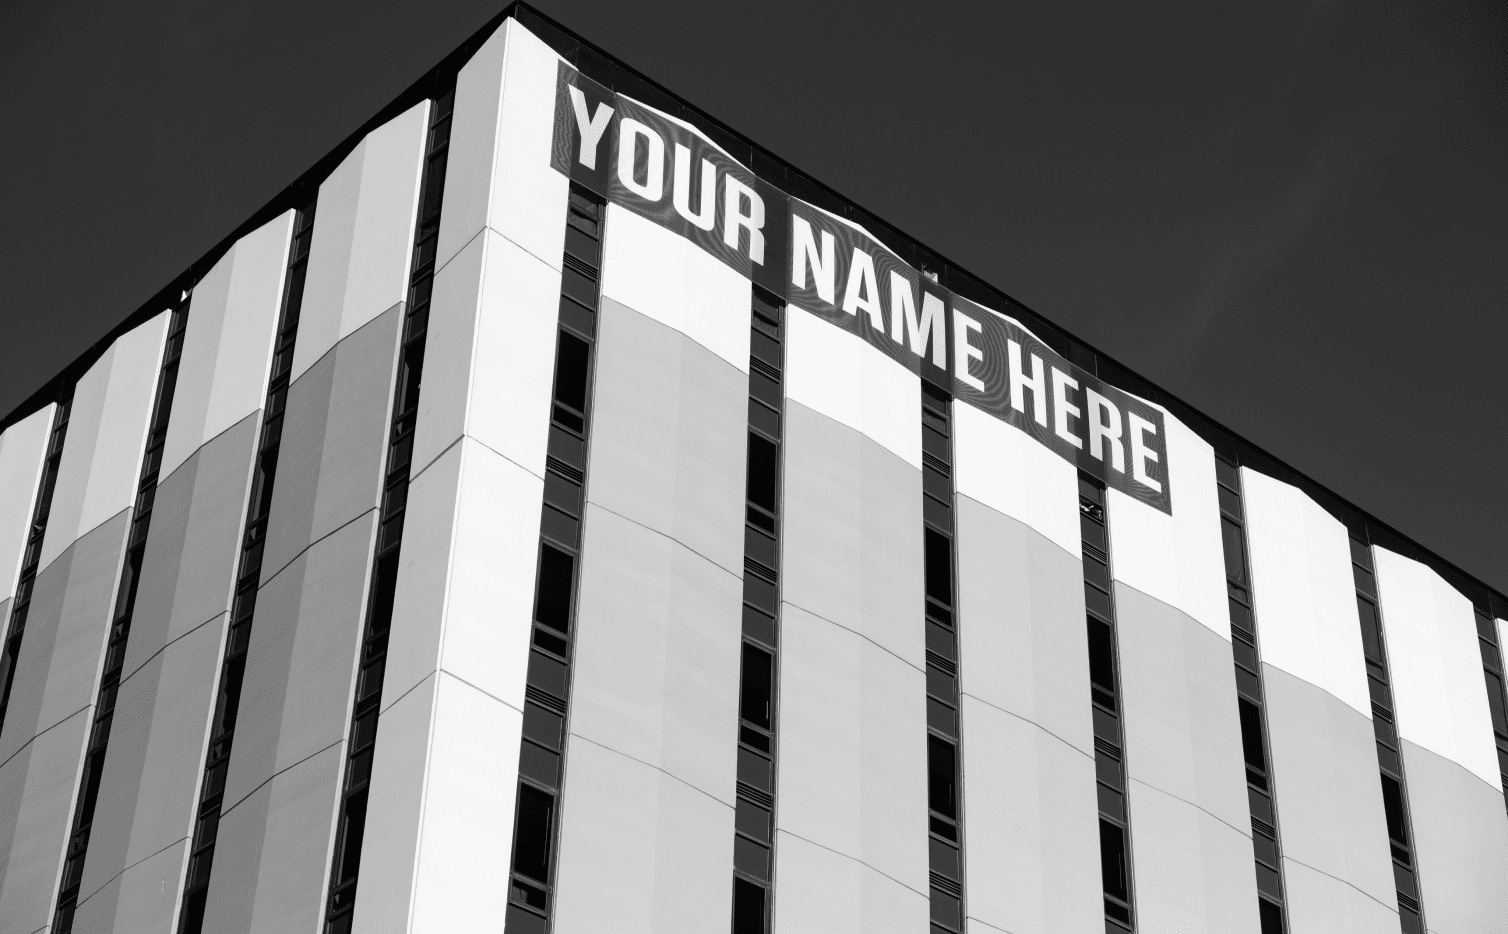 This image of a building bearing the words "Your name here" highlights the topic of this piece's cybersecurity discussion: Domain name protection.